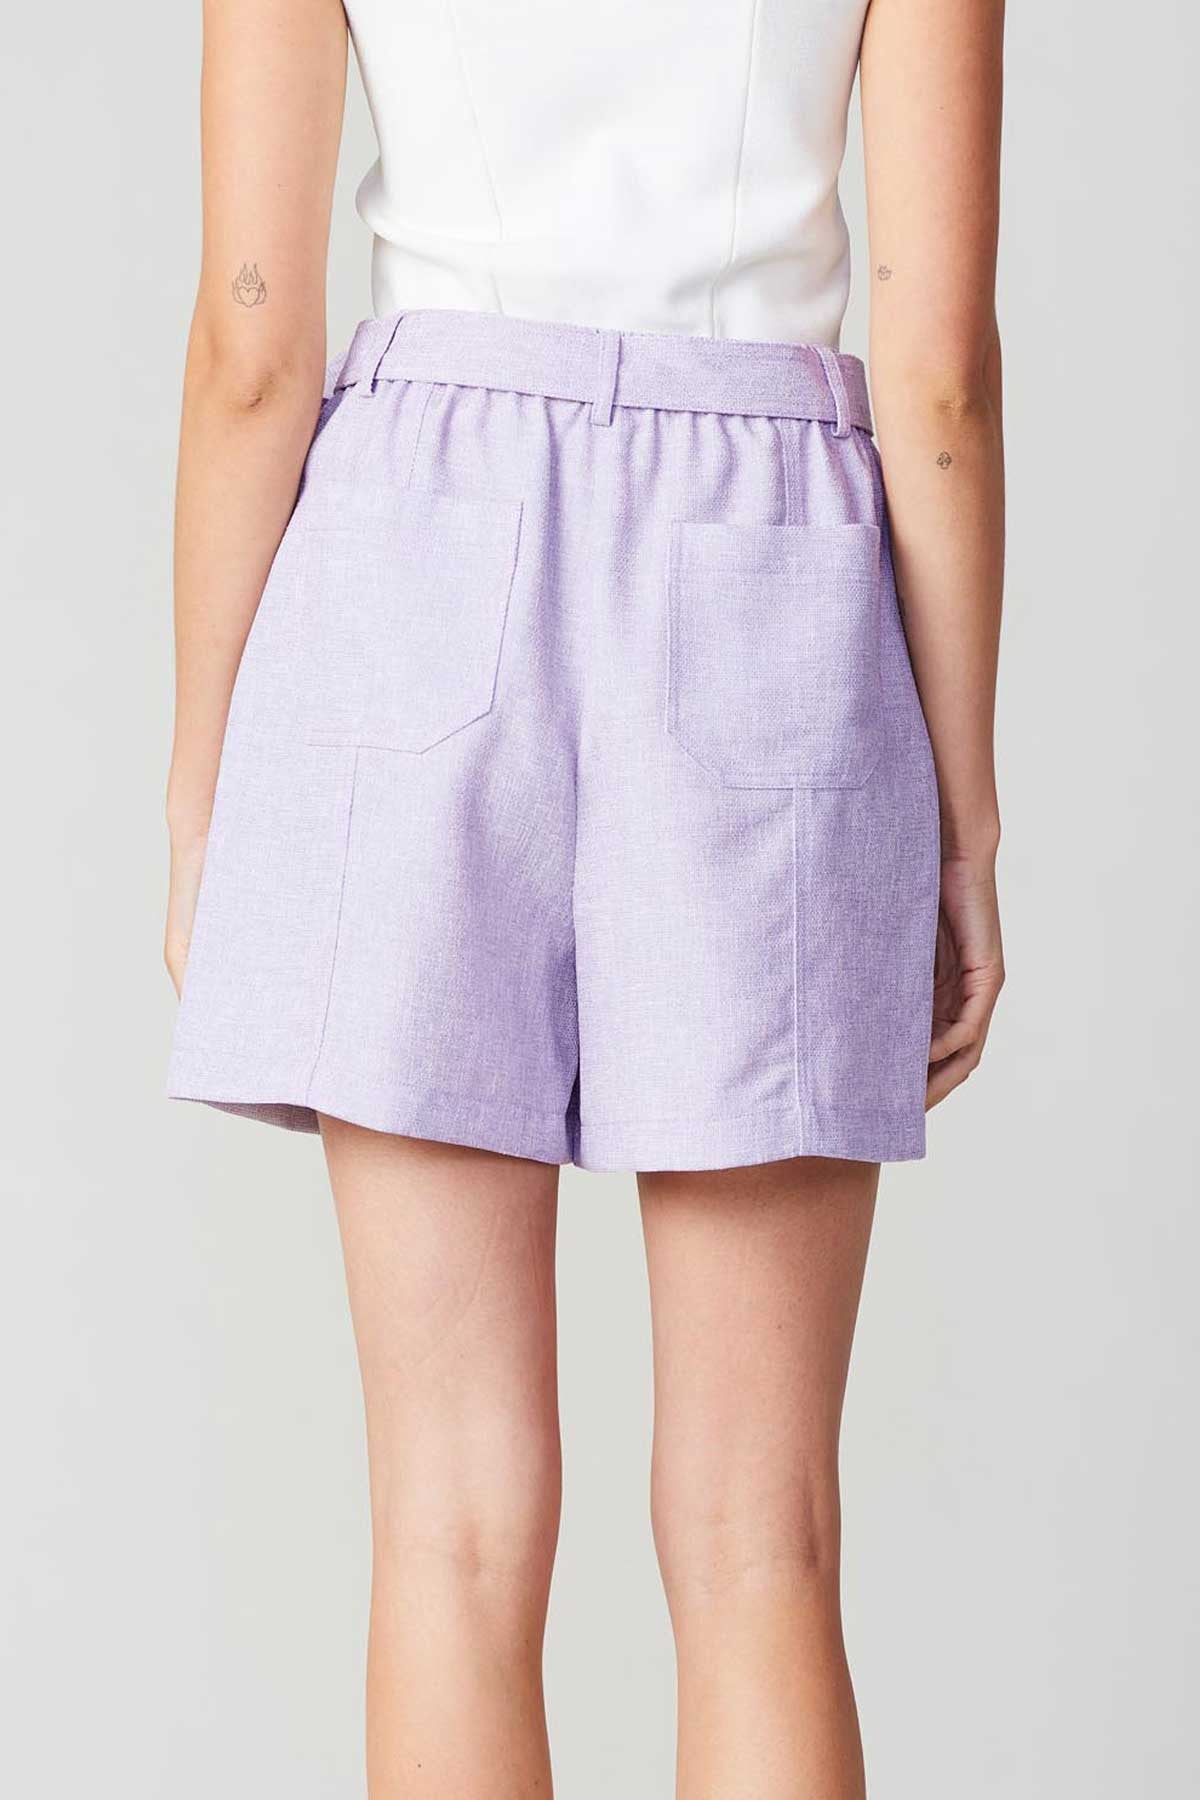 Out of Pocket Detail Shorts